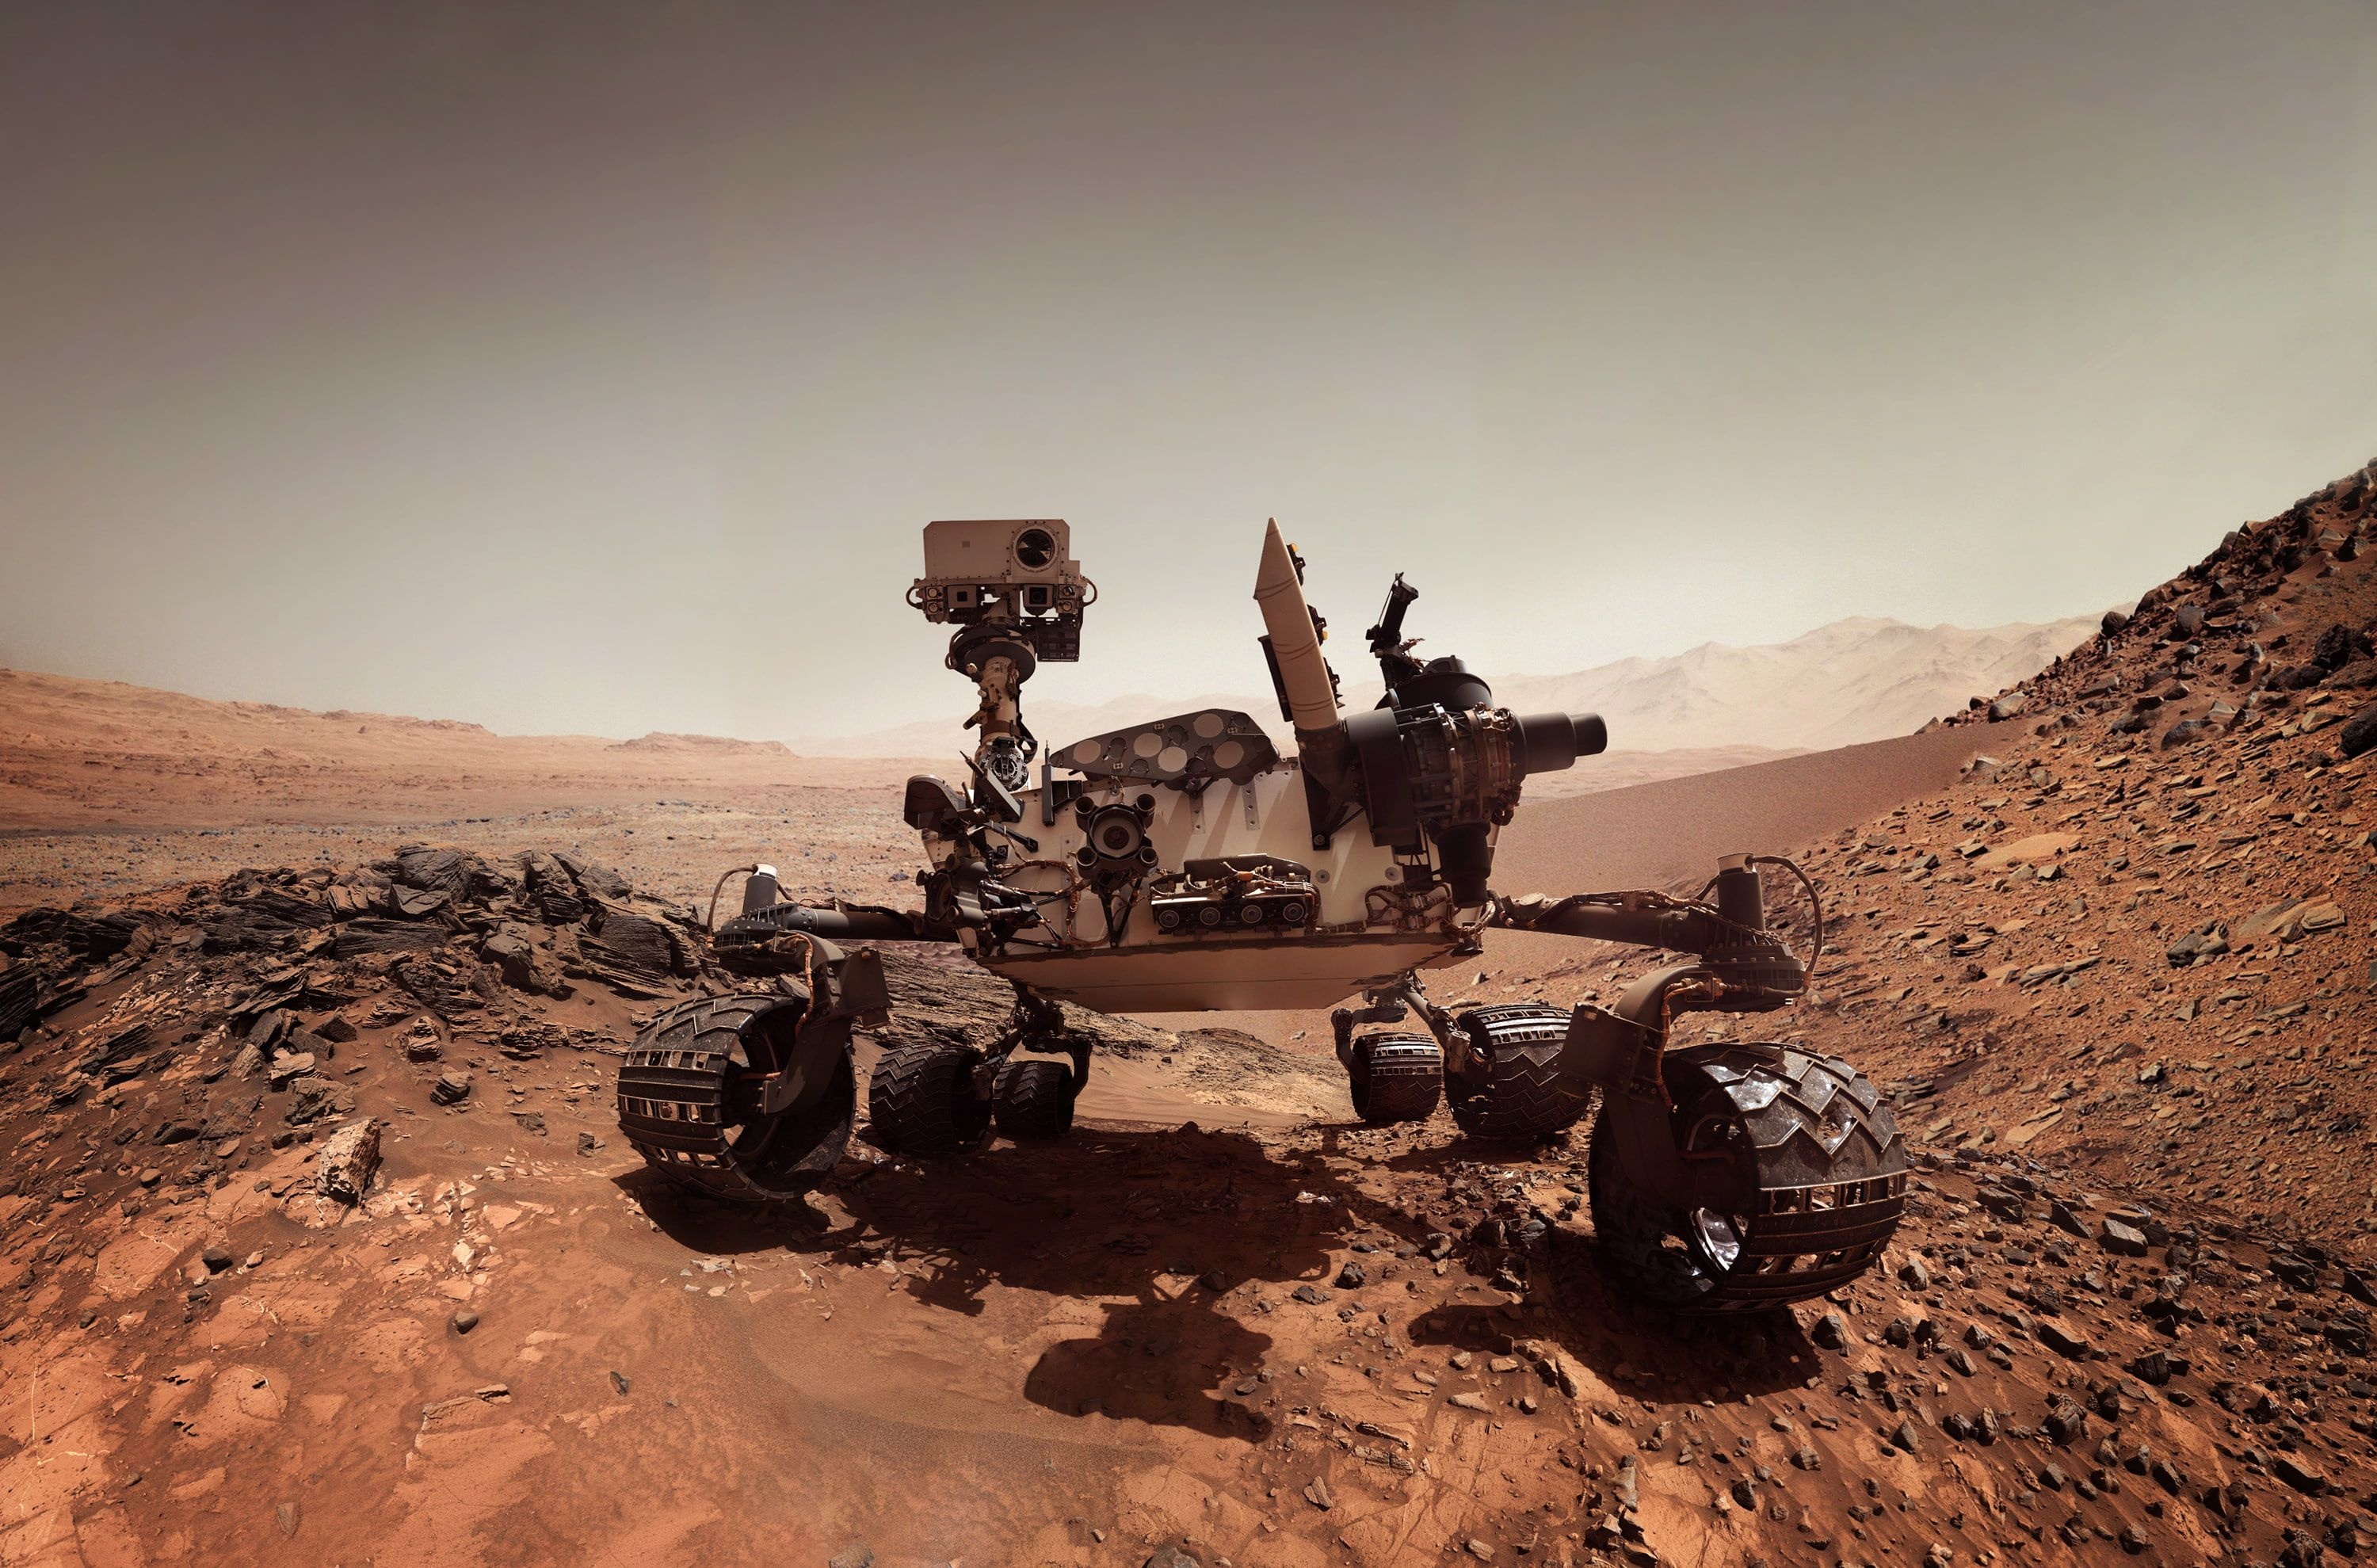 Curiosity rover wallpapers, Free backgrounds, Space exploration, Martian scenery, 3000x1980 HD Desktop